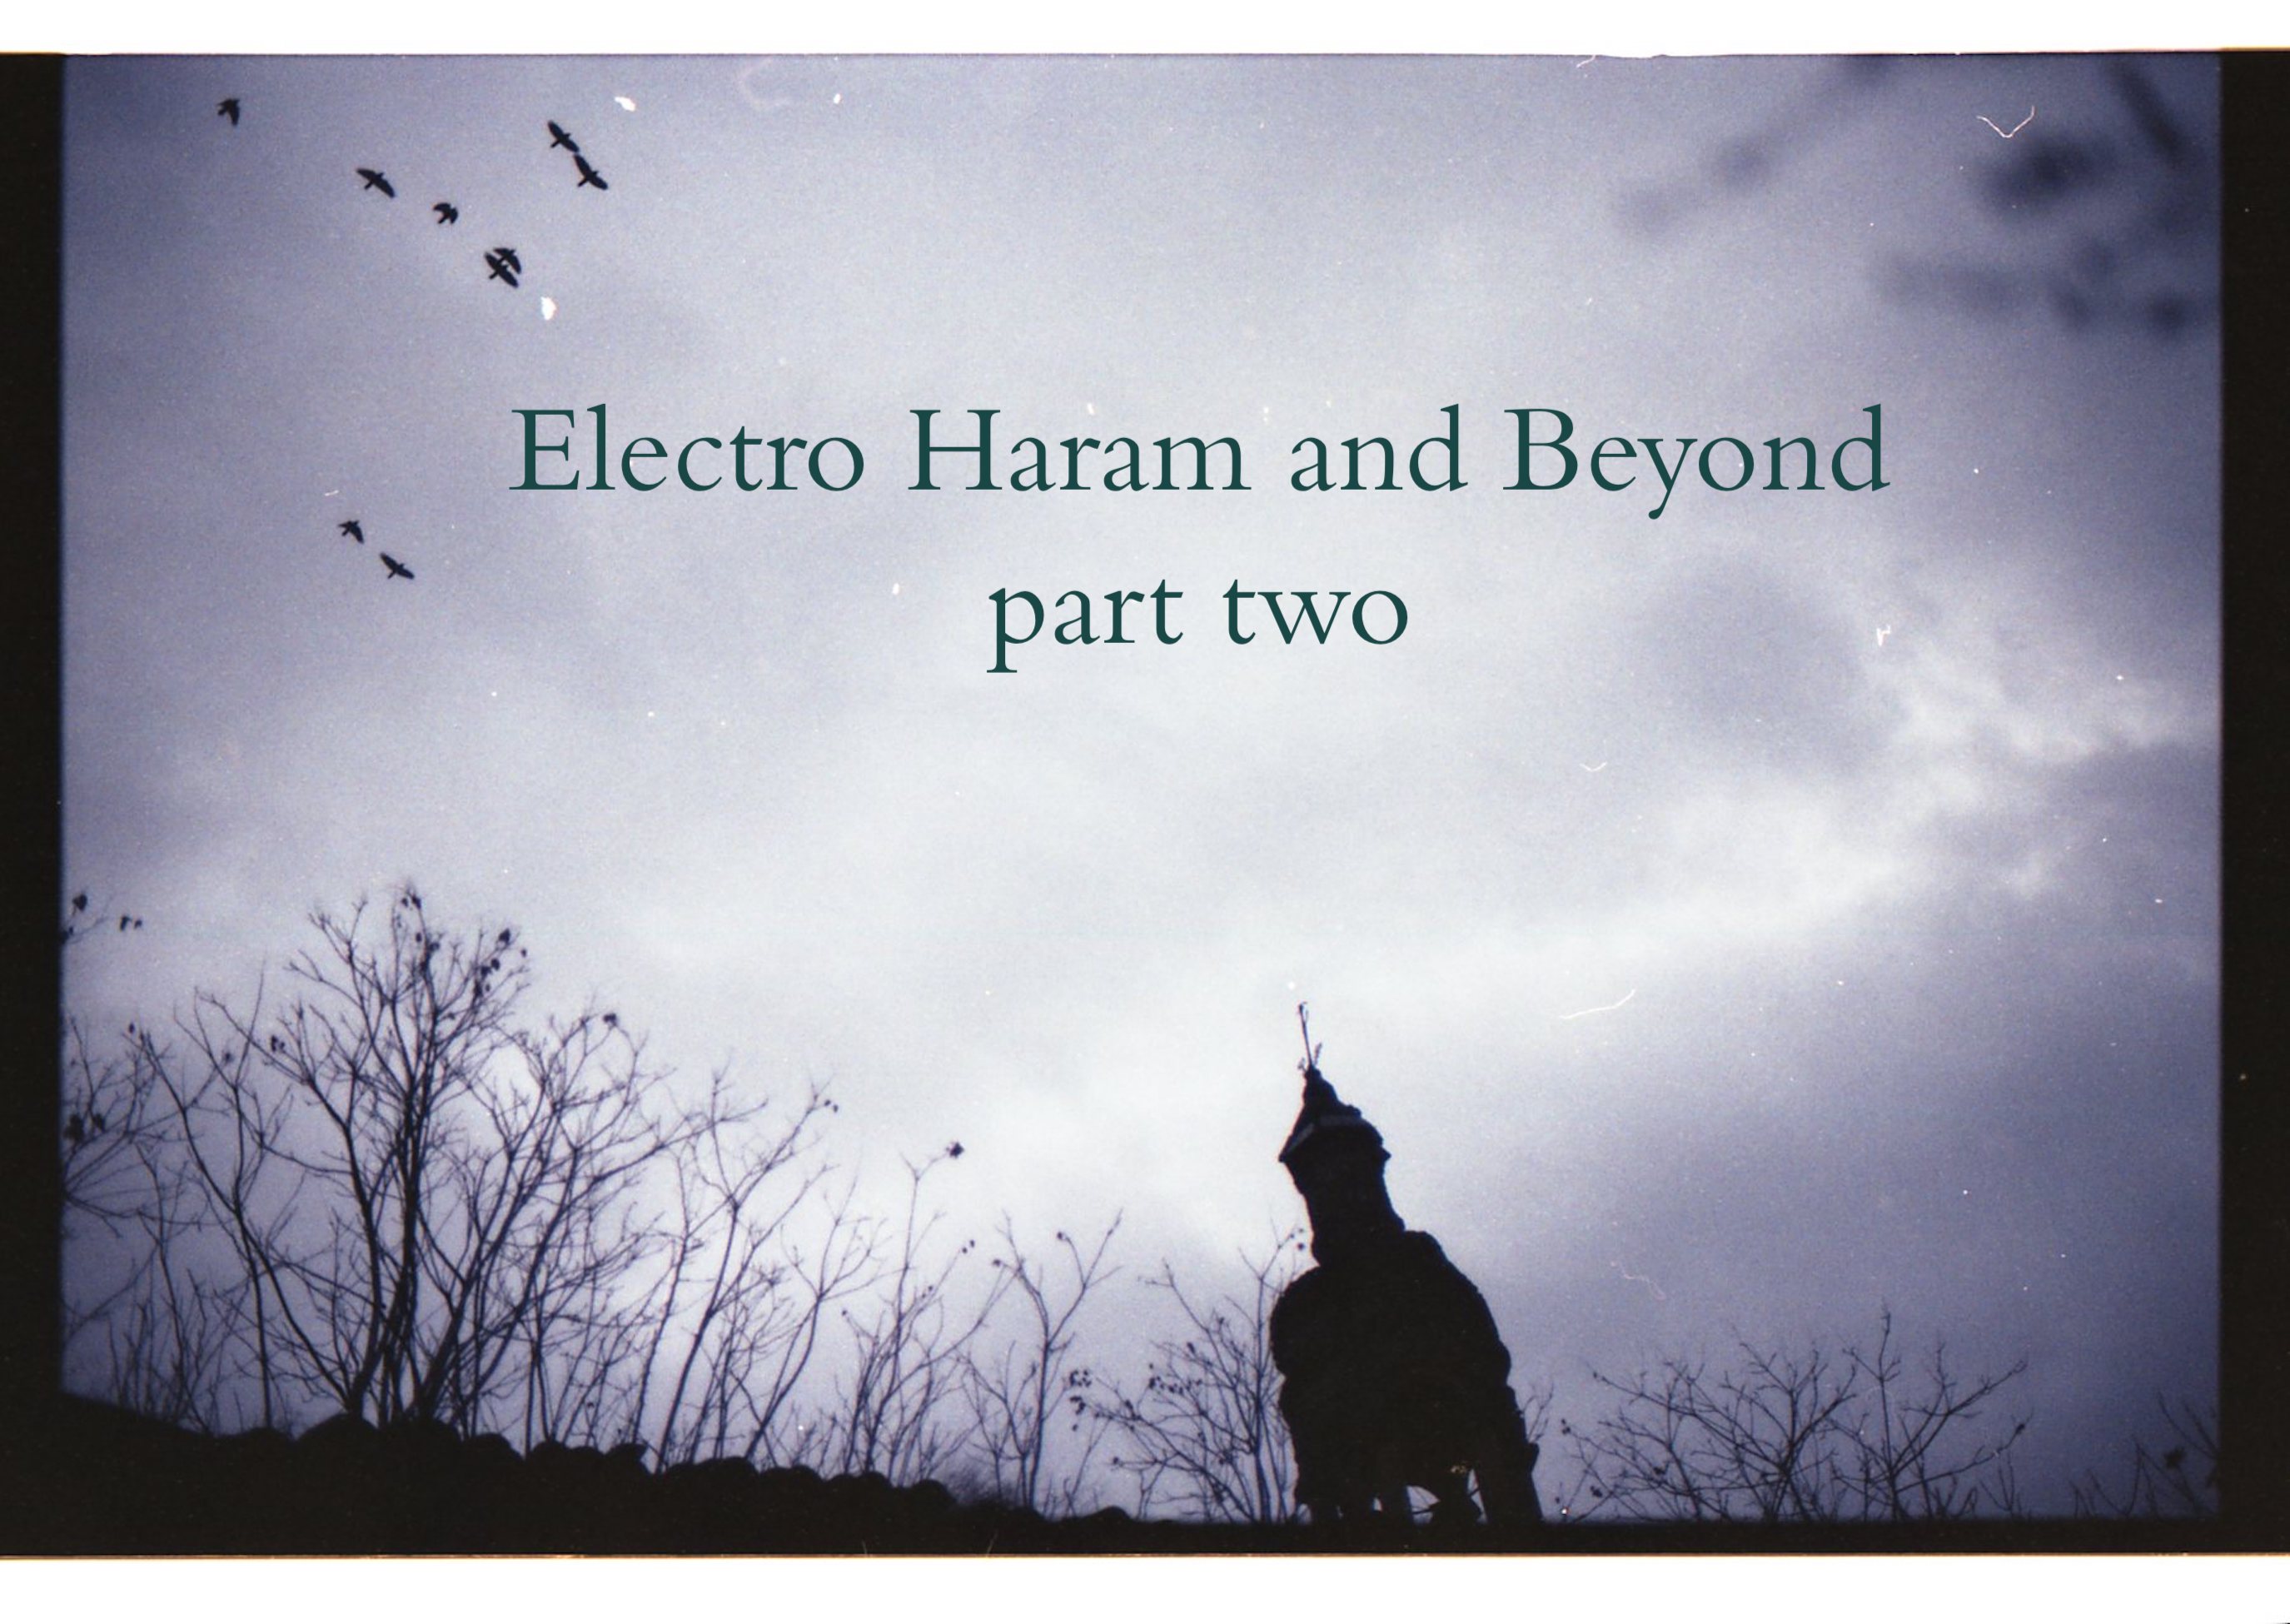 Electro Haram and Beyond, part two